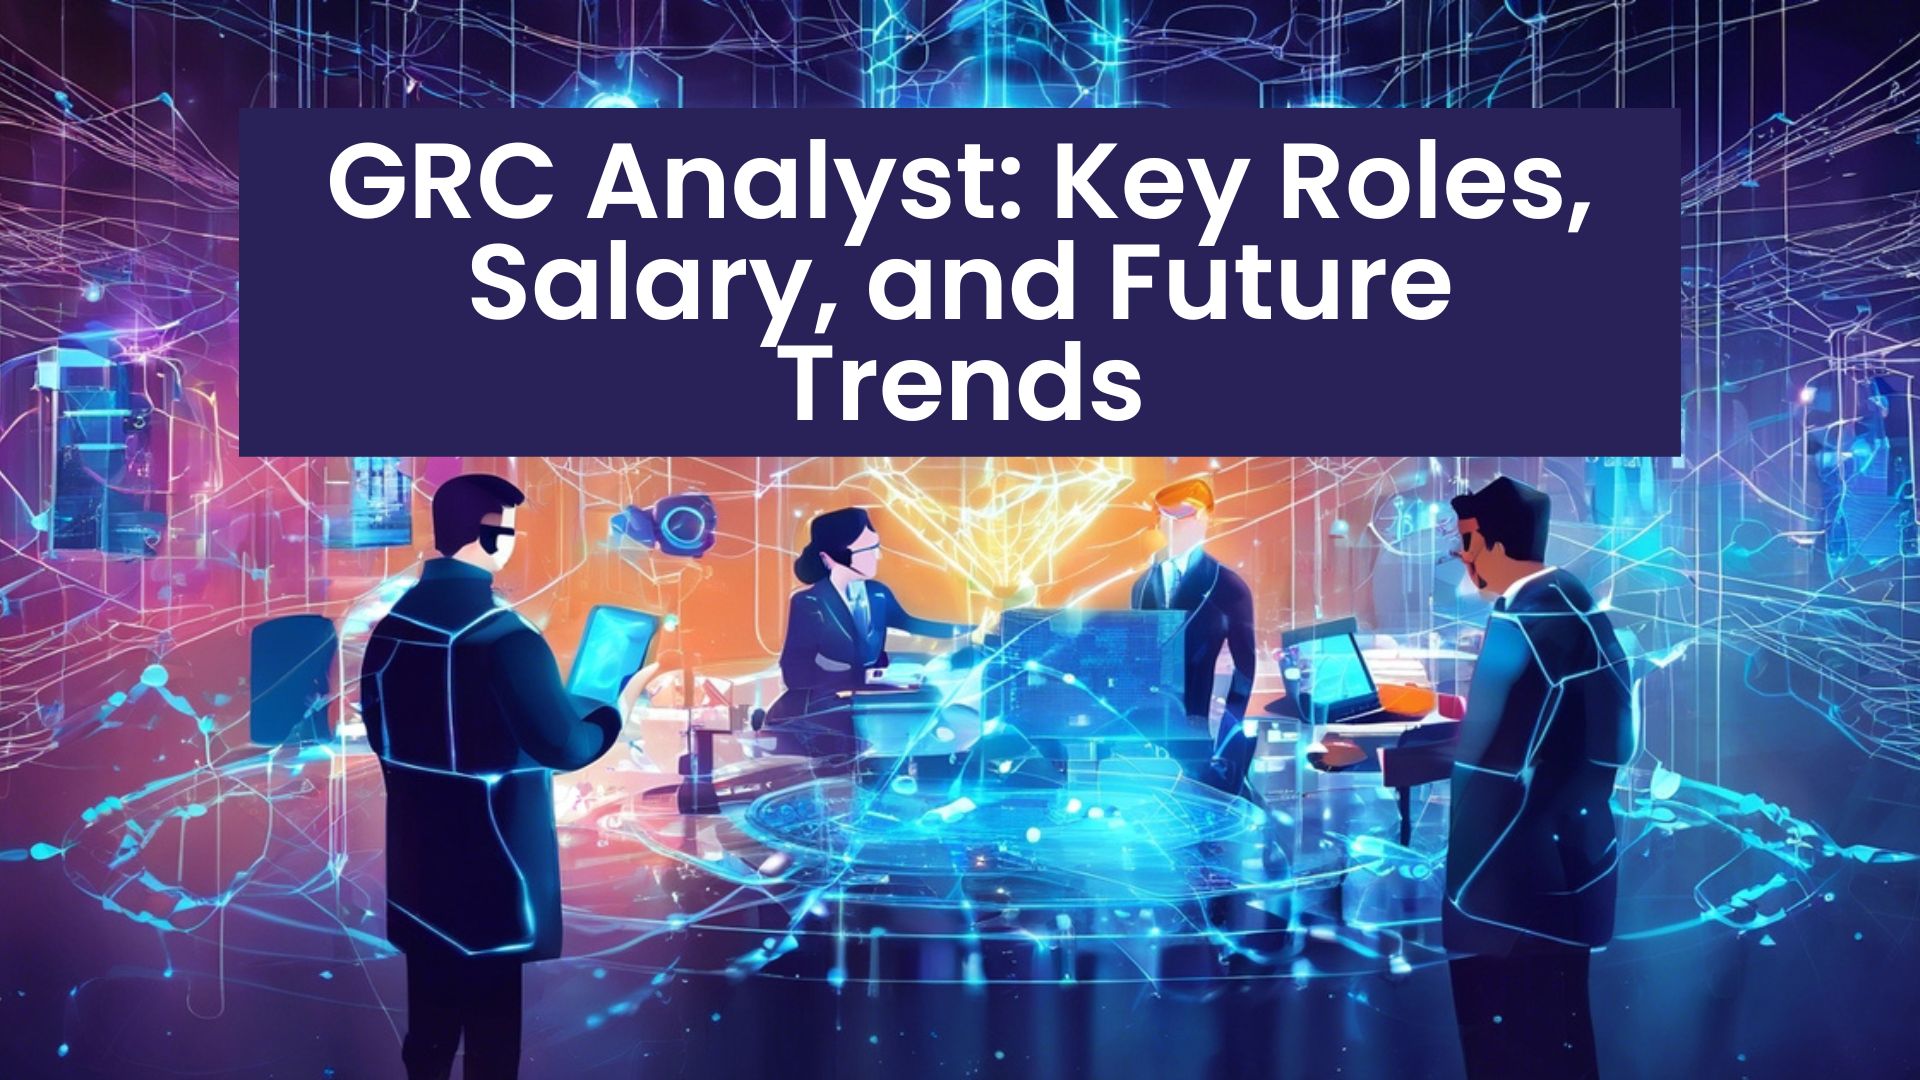 GRC Analyst Key Roles, Salary, and Future Trends